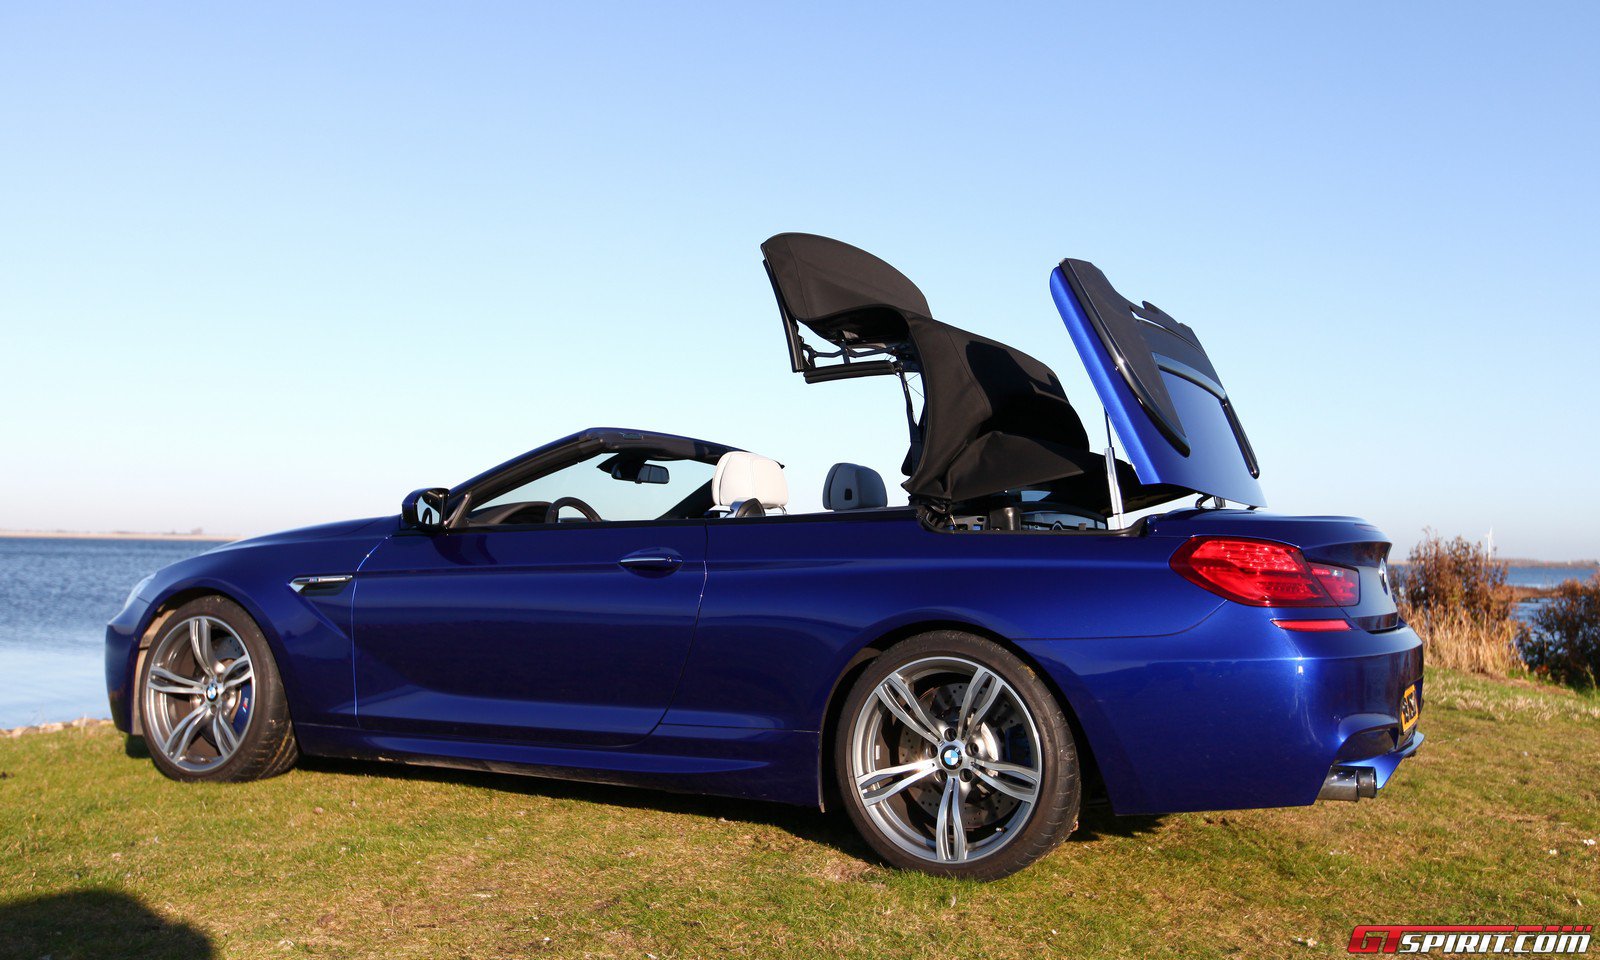 Bmw 325d convertible road test #5